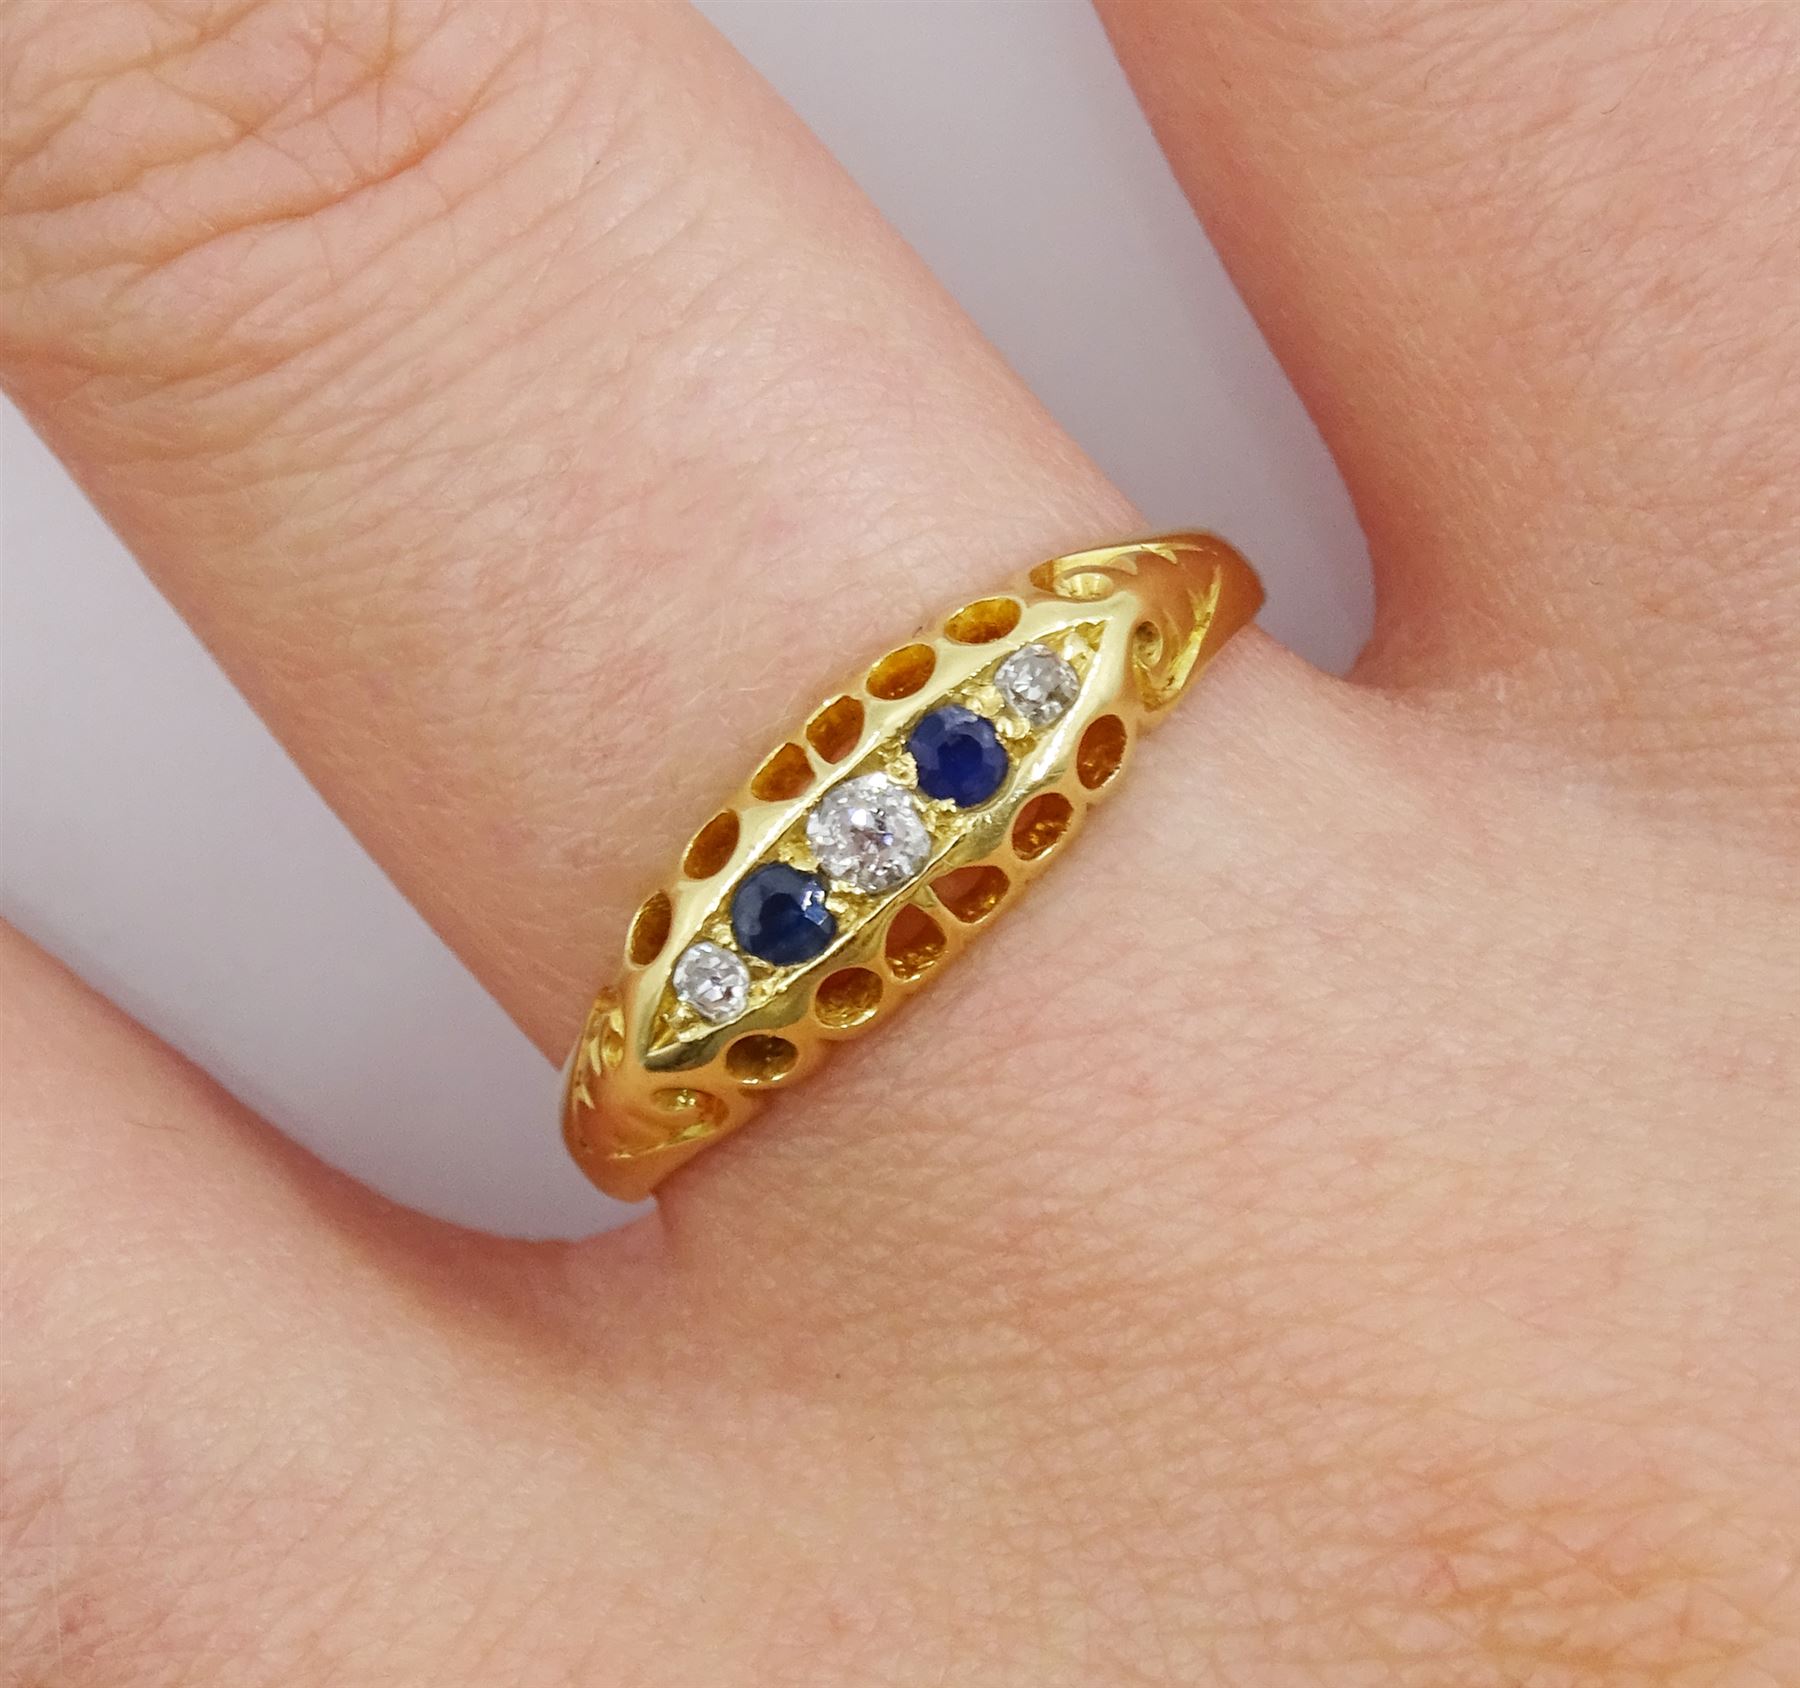 Early 20th century 18ct gold five stone old cut diamond and sapphire ring - Image 2 of 4